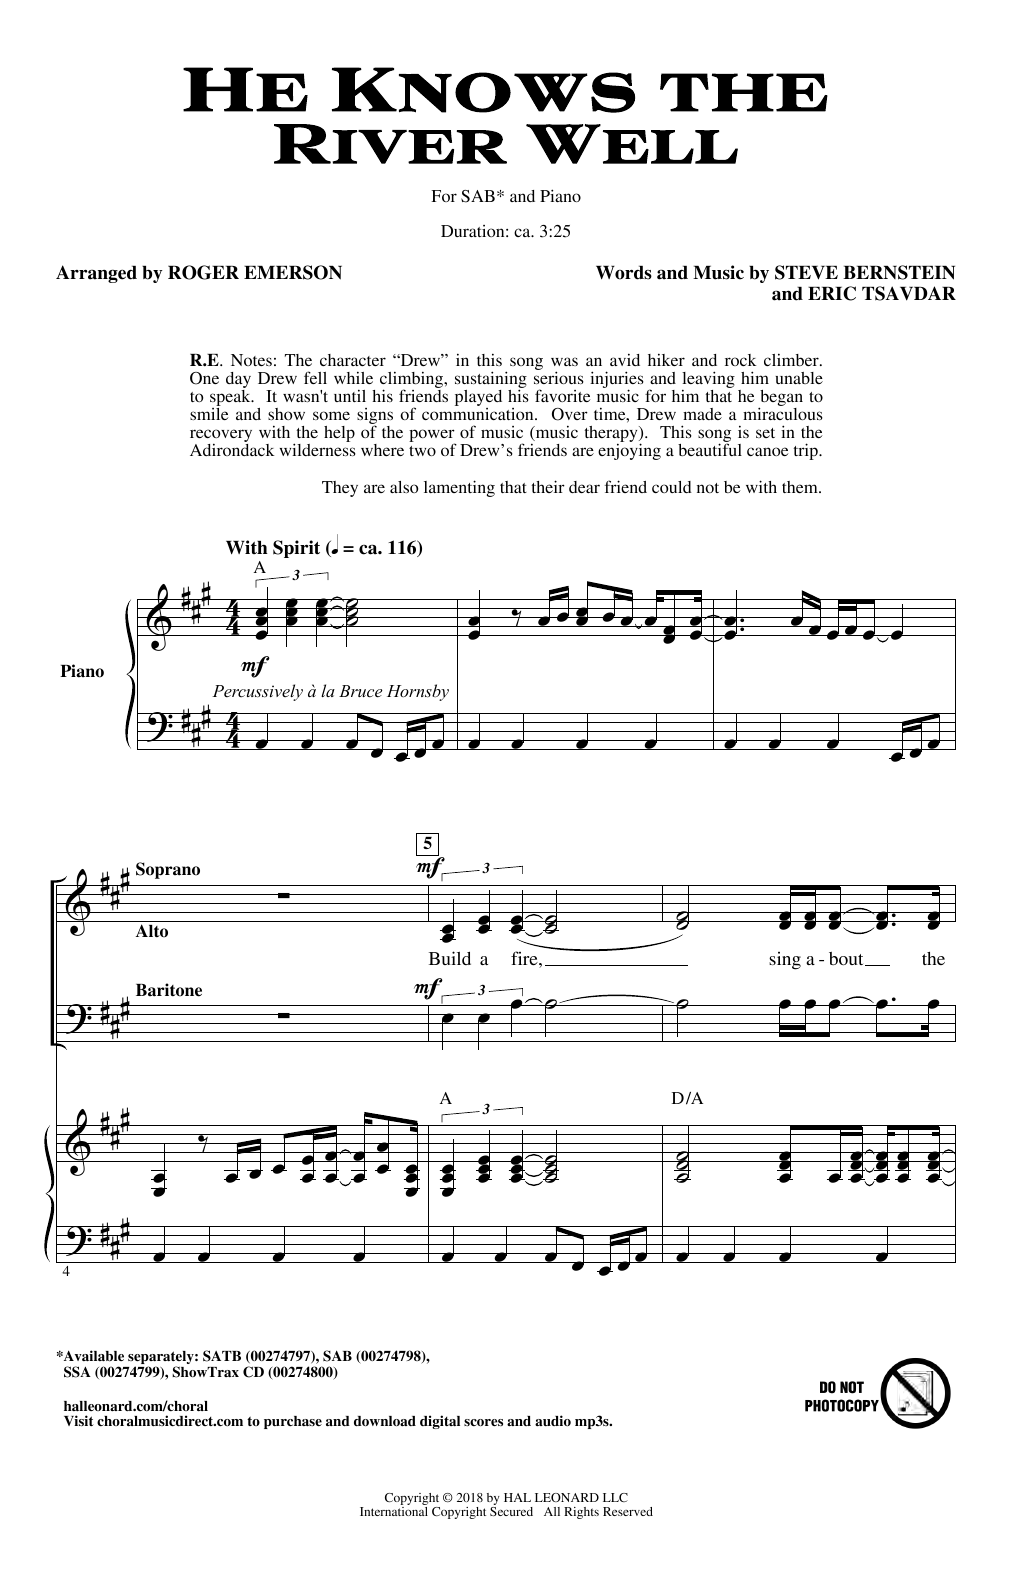 Download Roger Emerson He Knows The River Well Sheet Music